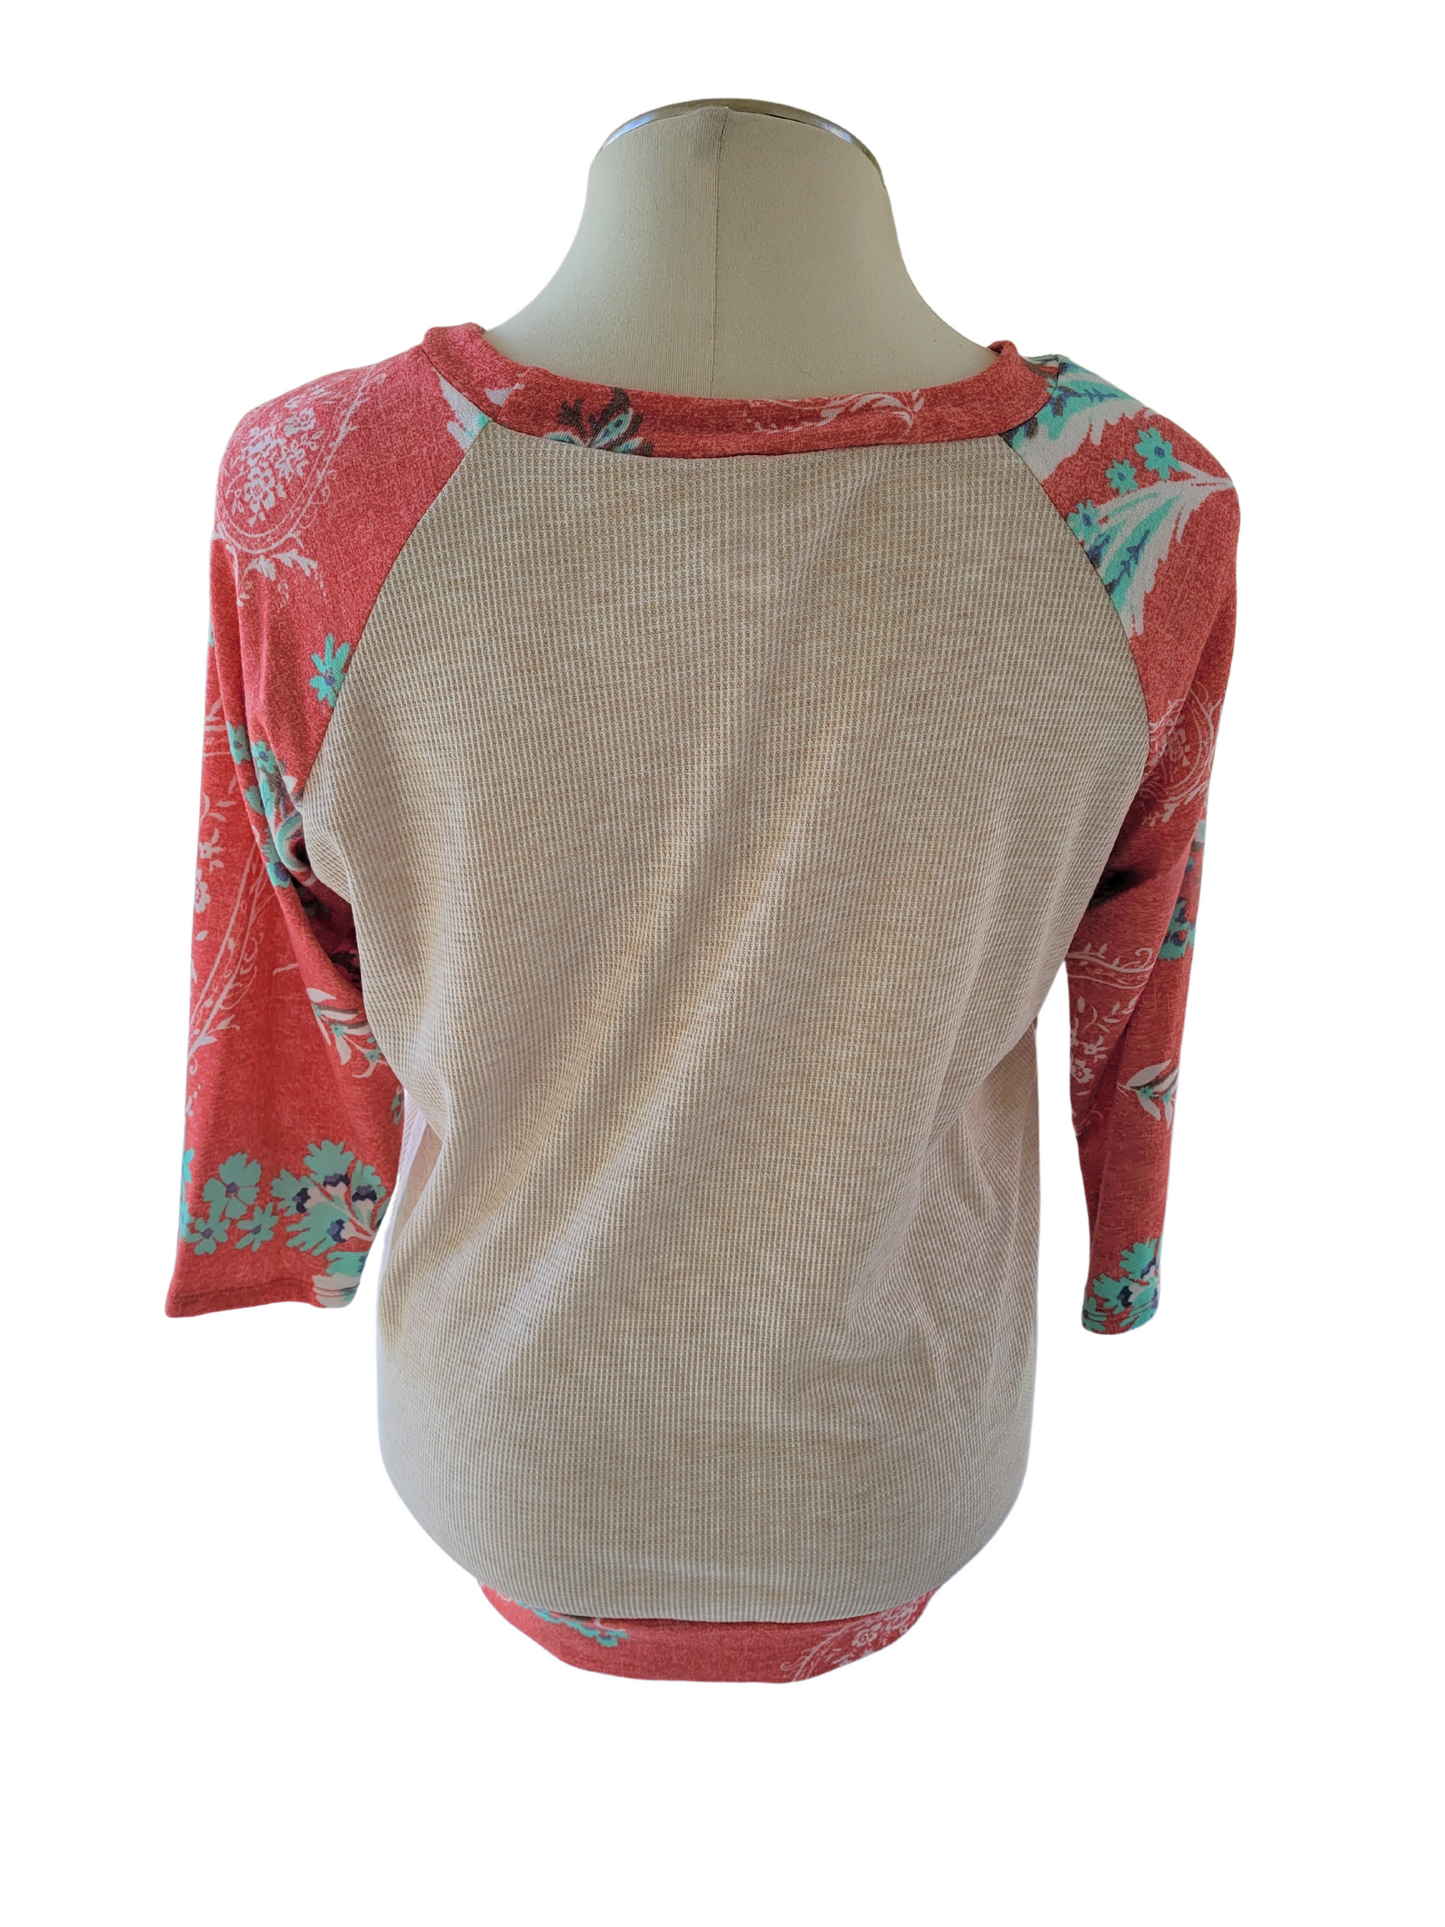 Peaches and Cream Floral Jersey S/M/L